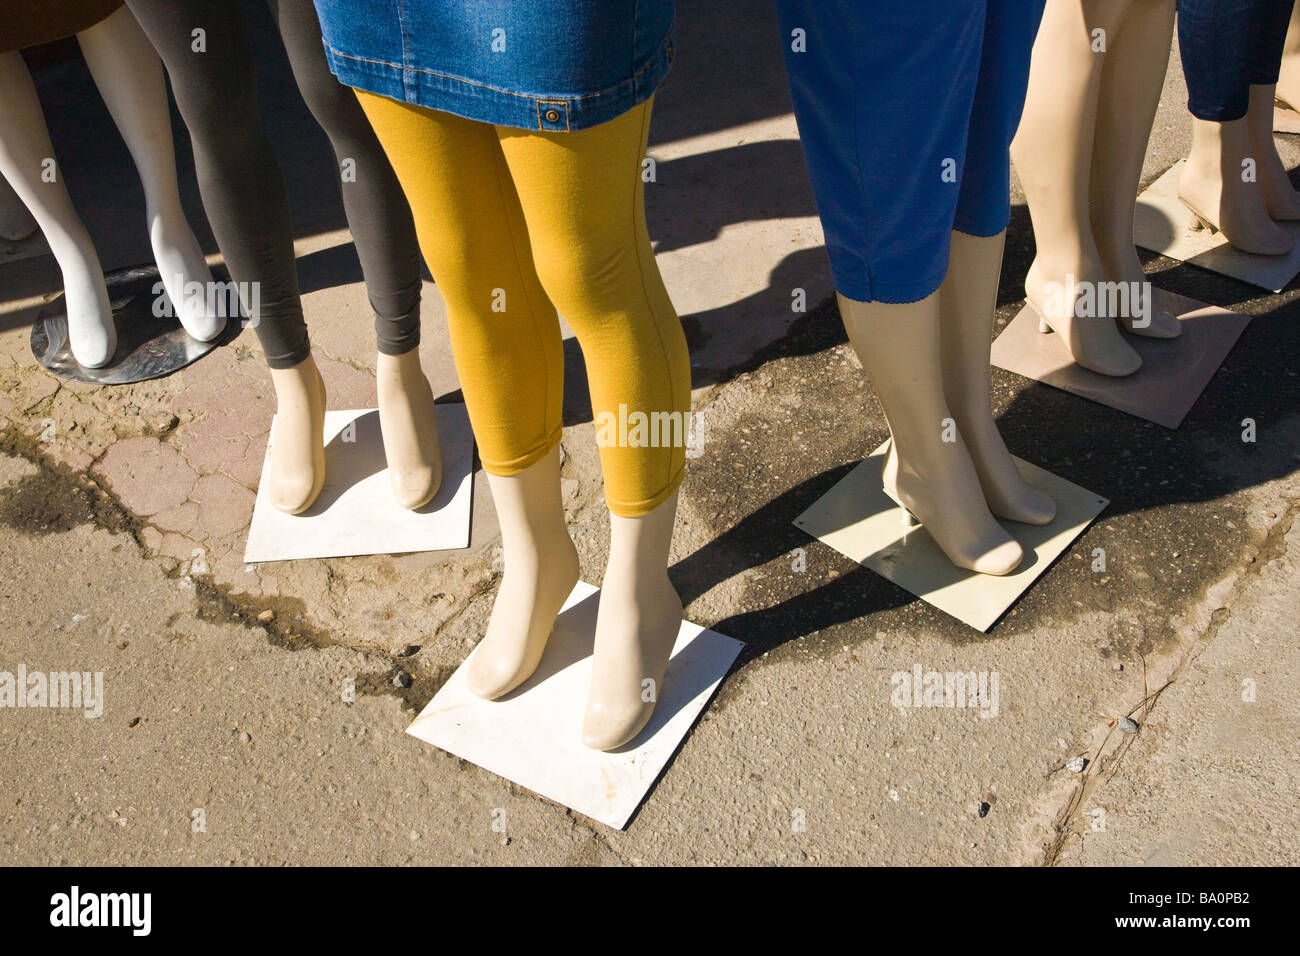 Legs of female mannequins wearing skirt & tights. Stock Photo